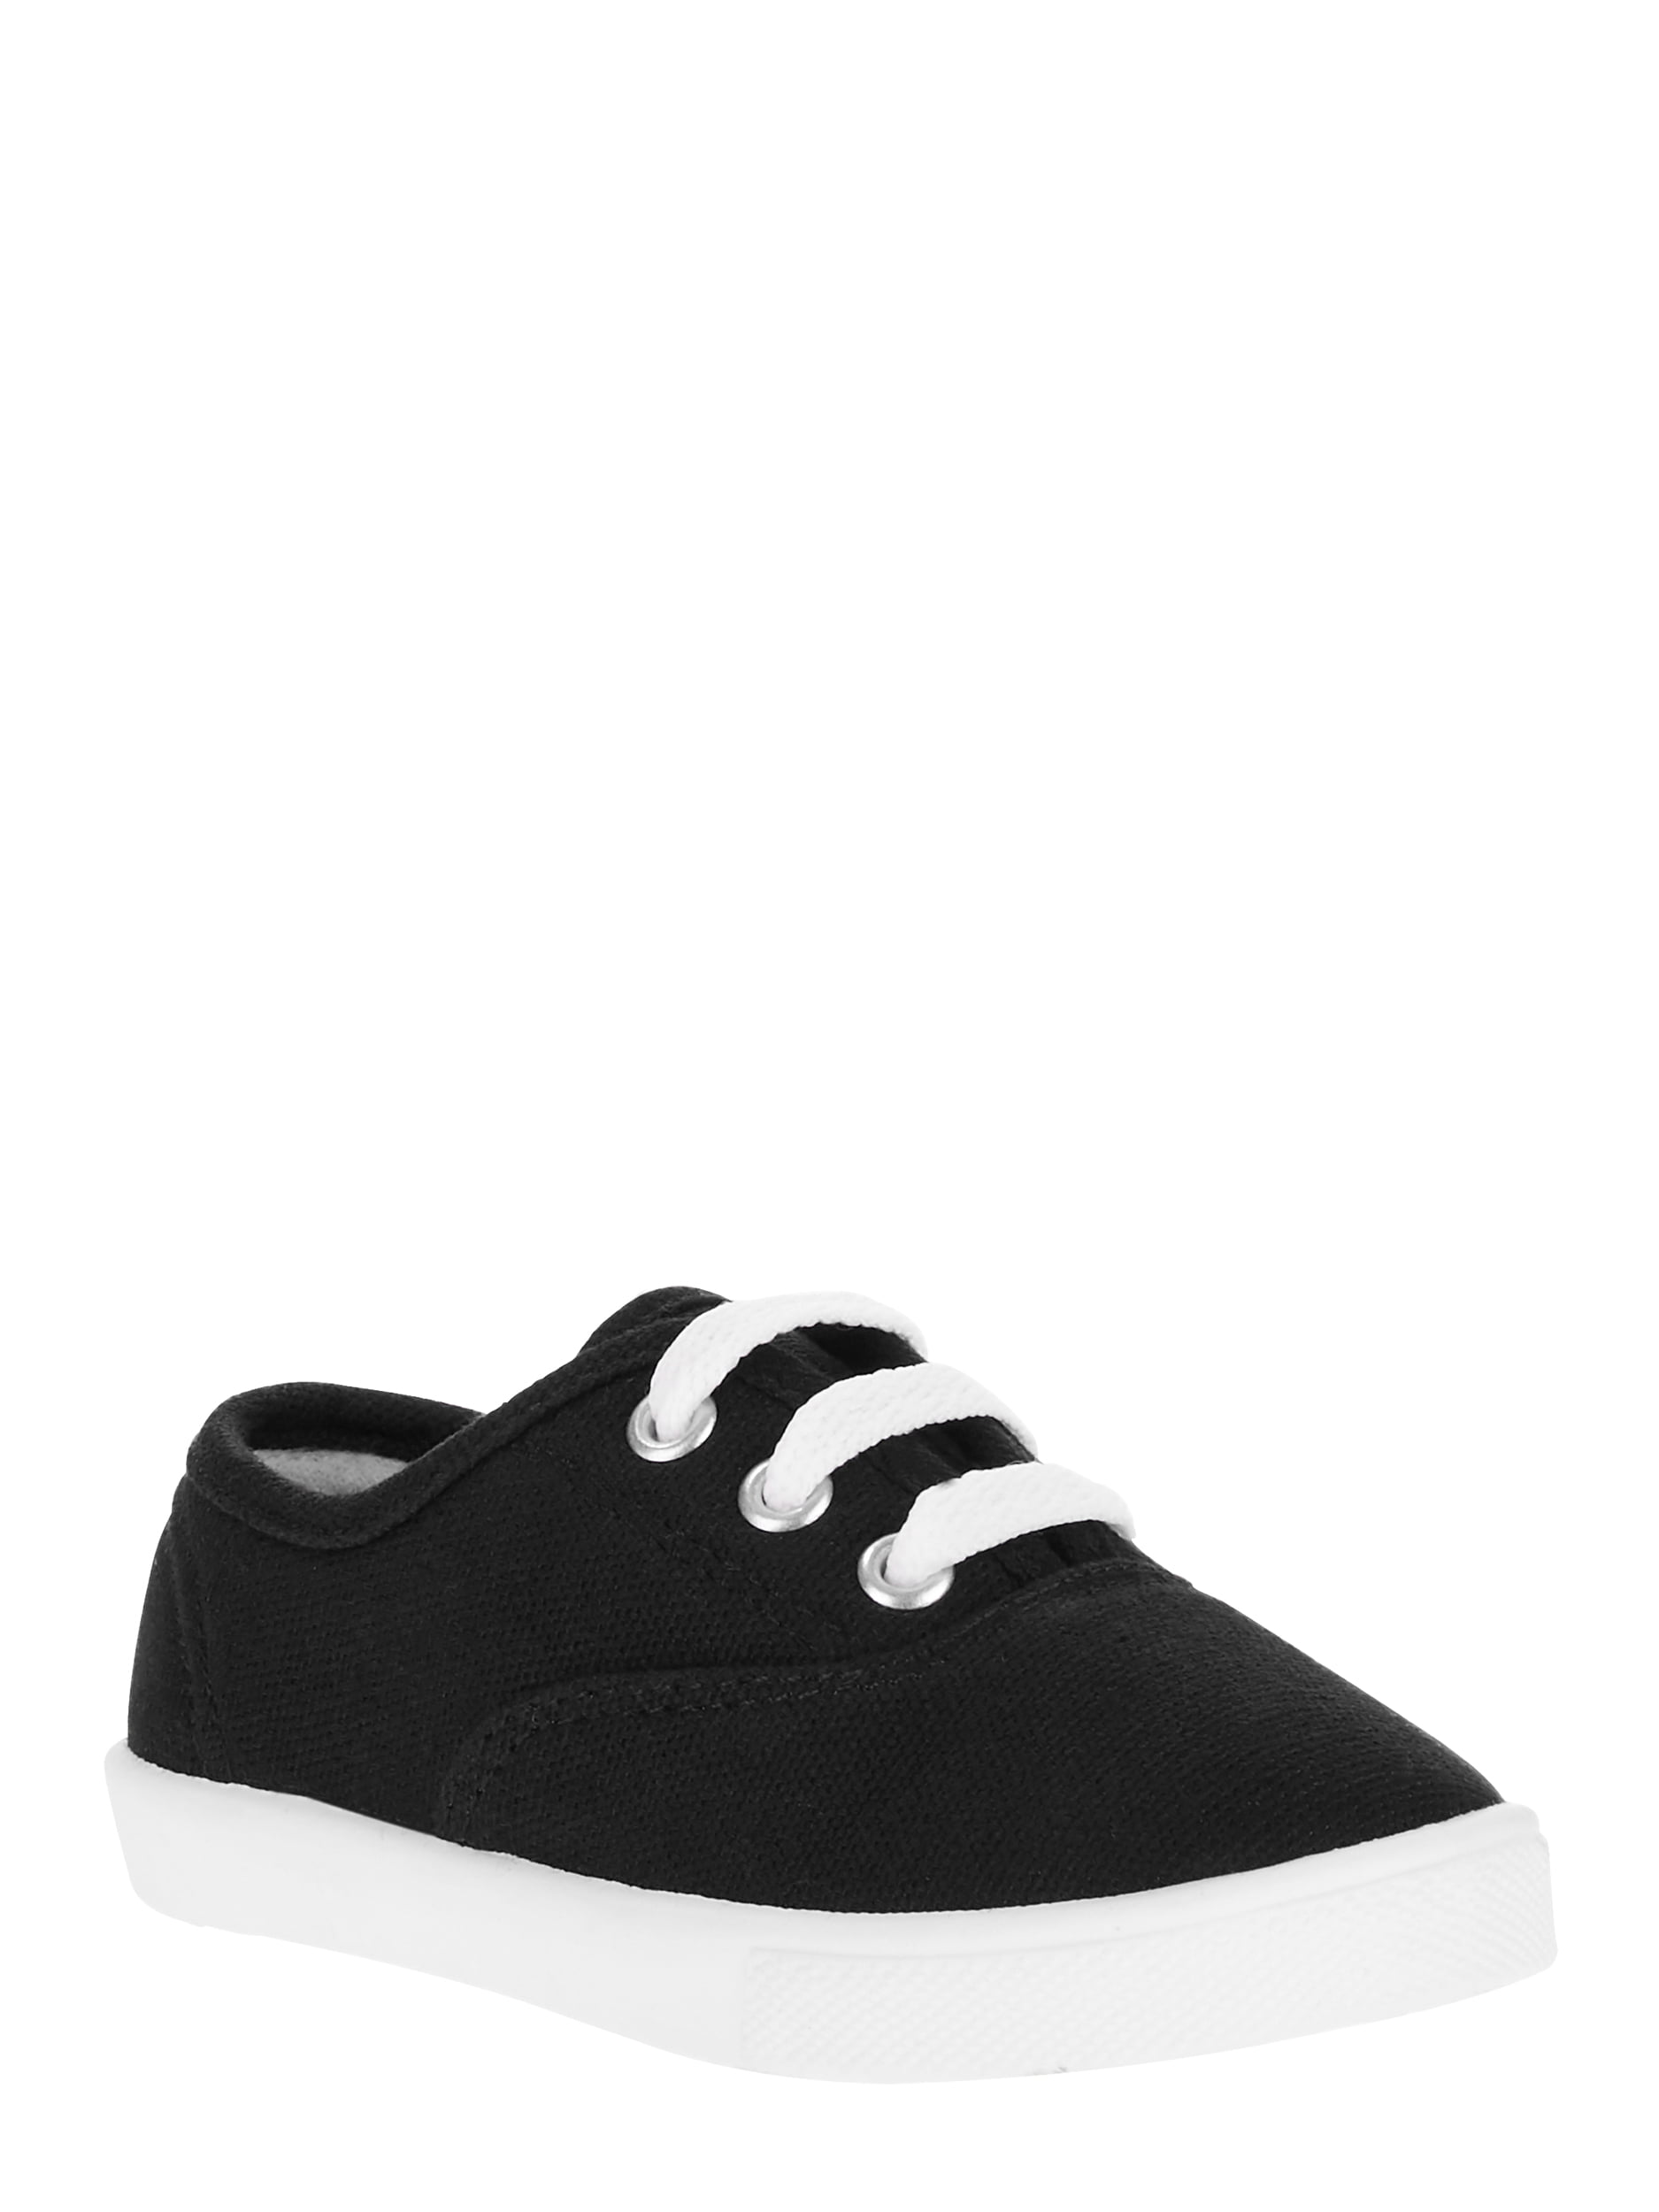 Faded Glory Toddler Girls' Lace Up Canvas Casual Shoe - Walmart.com